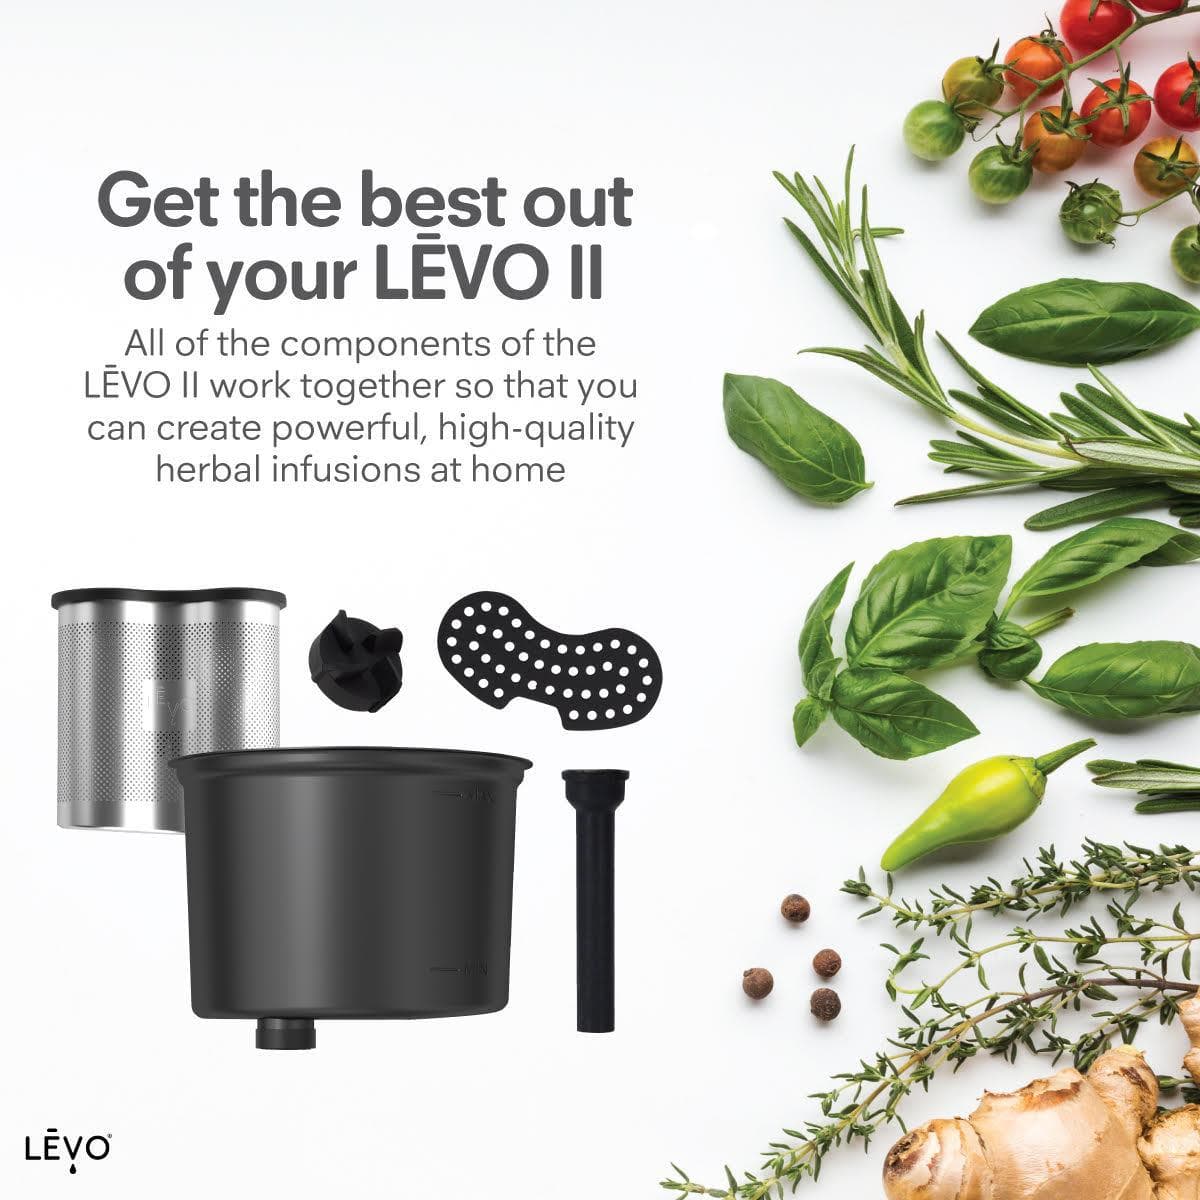 LEVO spare parts kit - get the most out of your LEVO II